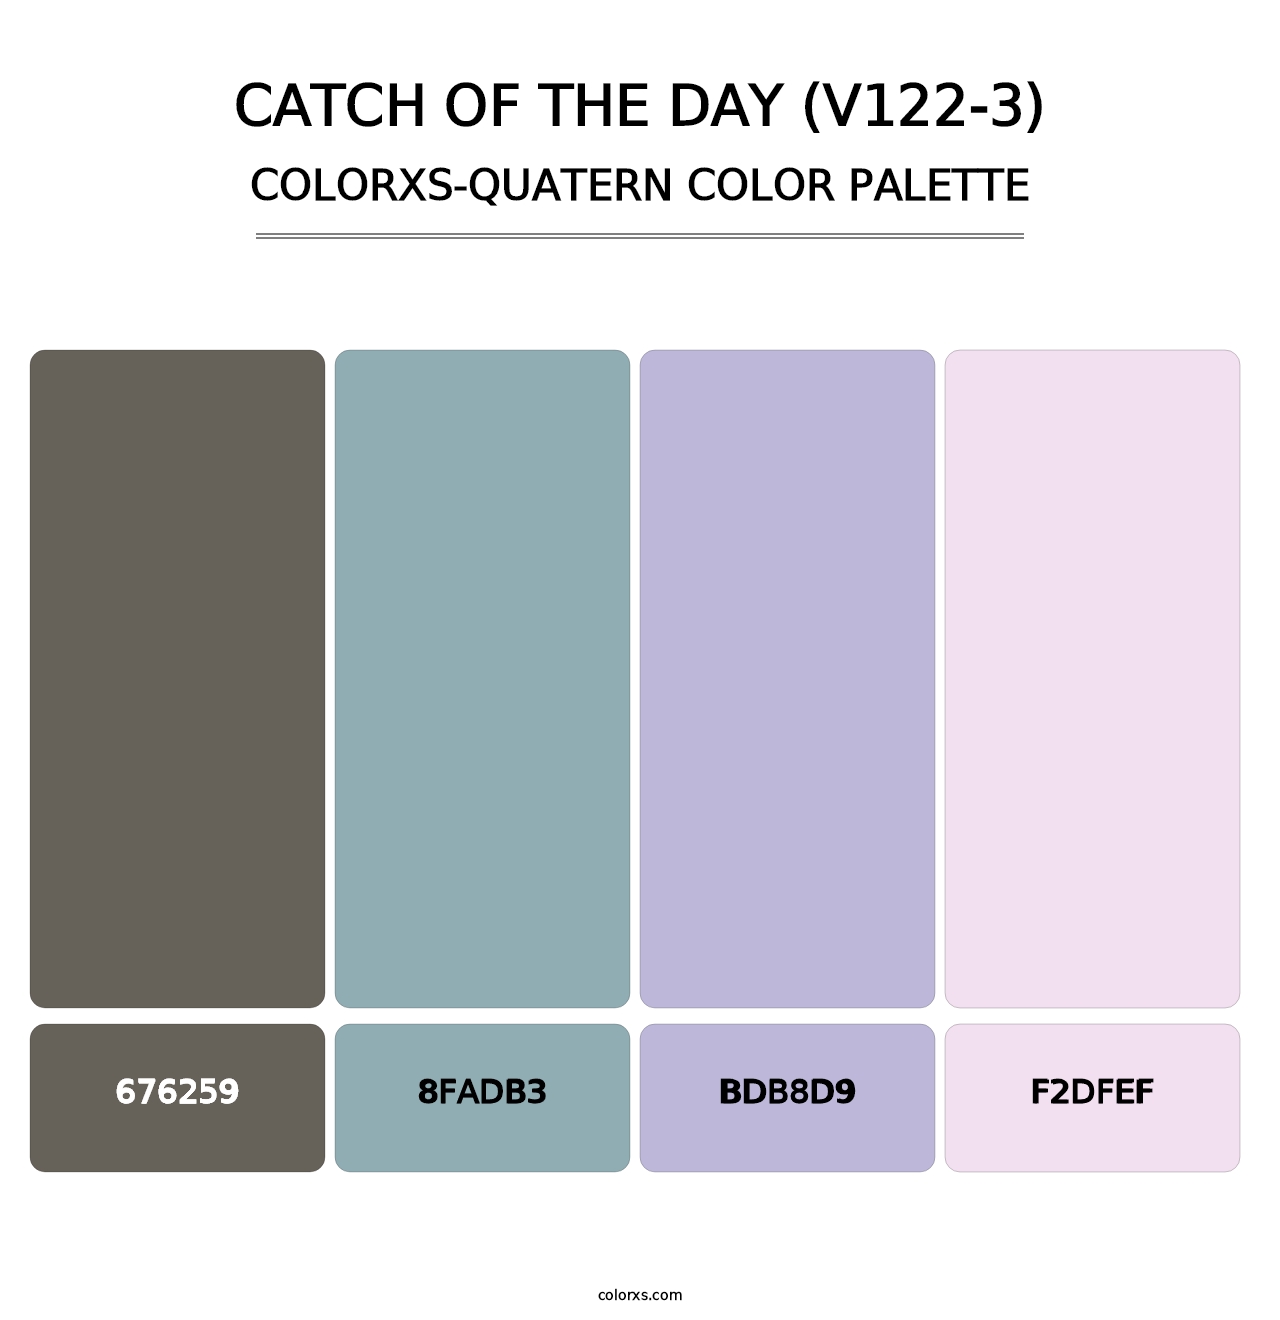 Catch of the Day (V122-3) - Colorxs Quatern Palette